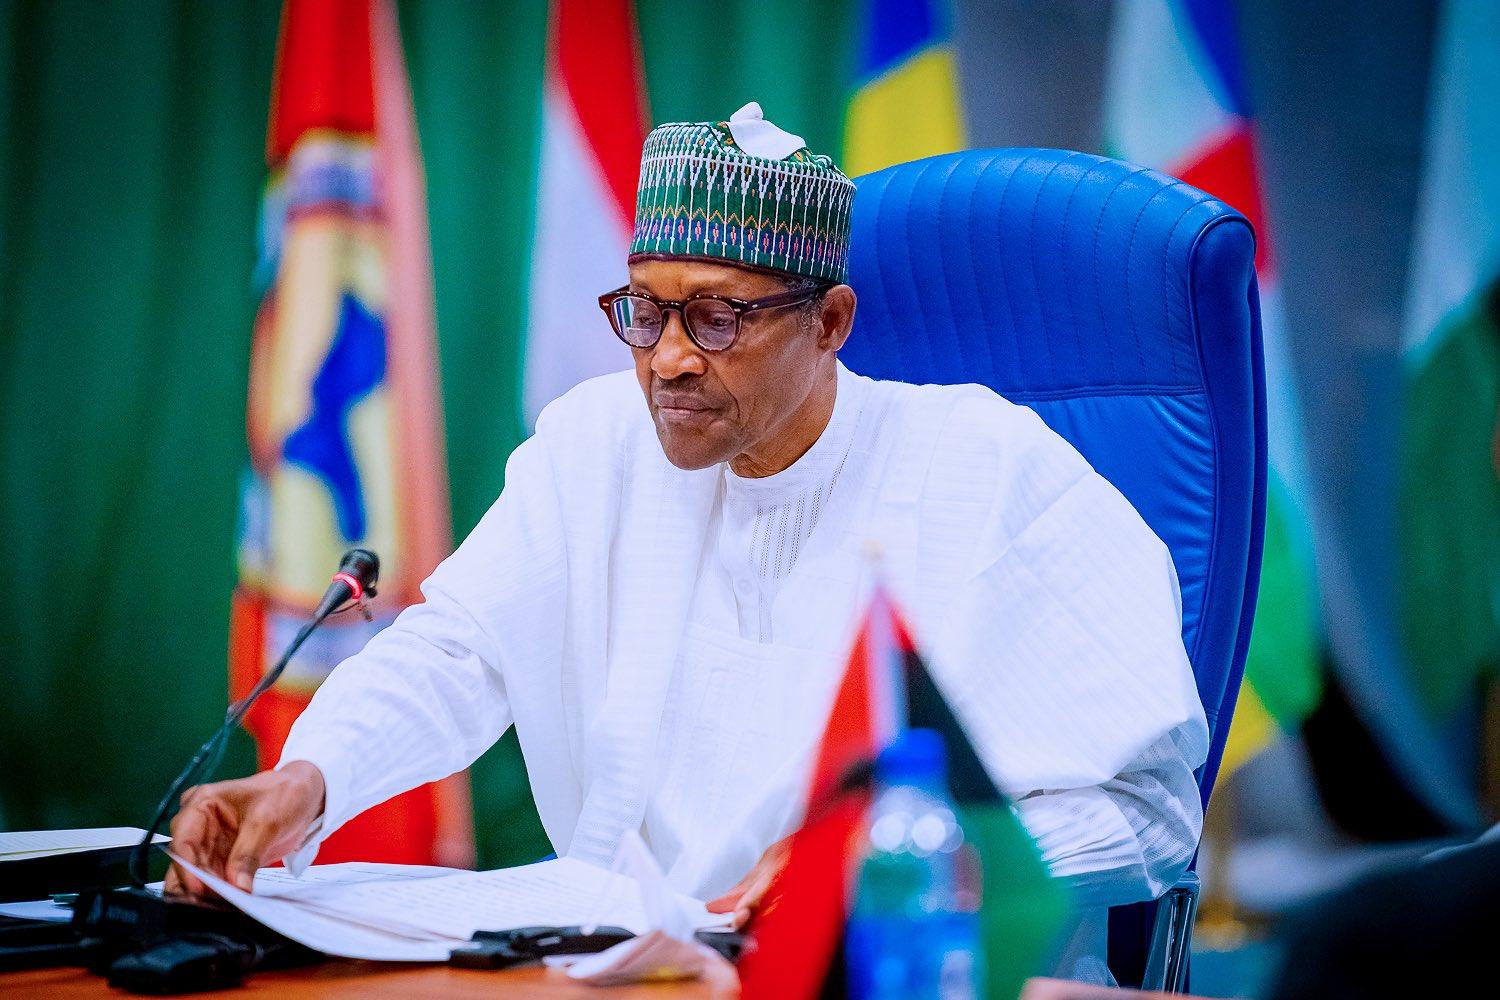 Buhari: Nobody can blackmail me on illicit enrichment, vows to serve God, Nigeria until last day in office